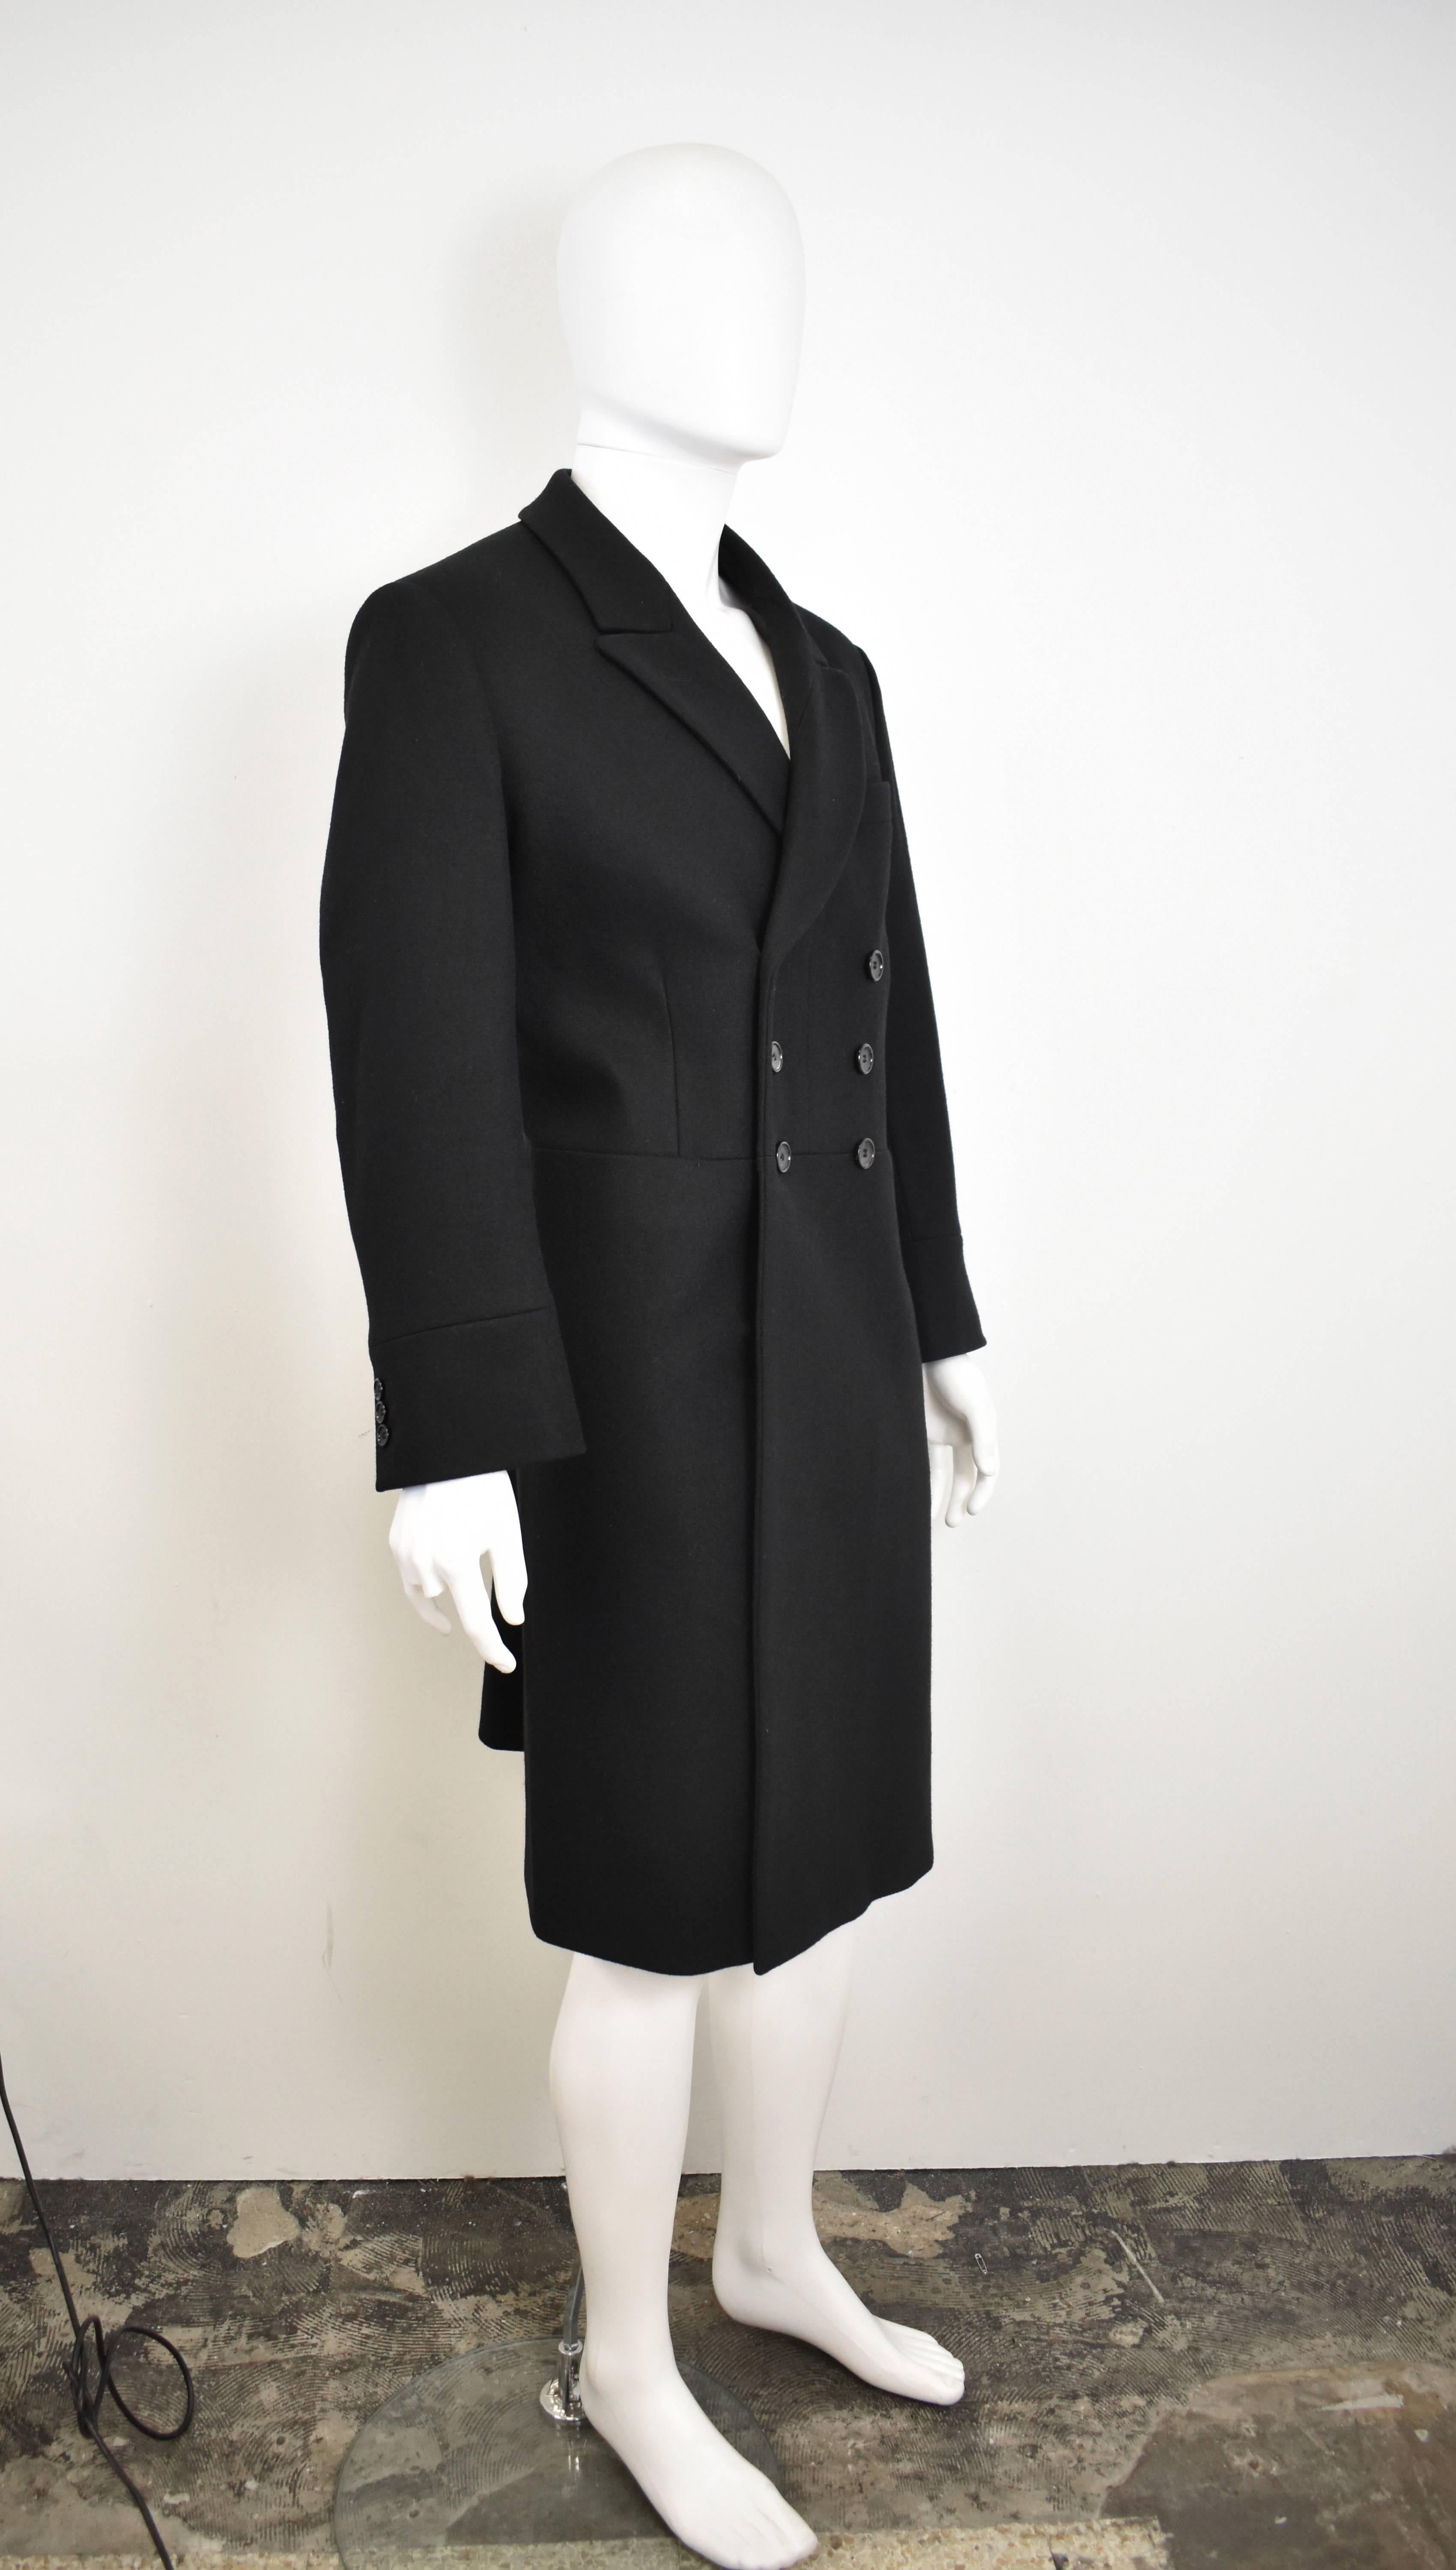 Alexander McQueen Black Wool Double Breasted Coat with Long Vents. Tailored for a slim shape and made of a blend of wool and cashmere, it makes for a sharp, luxurious coat. 

Length - 43.5
Bust - 44
Waist - 42
Hips - 44
Sleeve length - 24

Size: IT